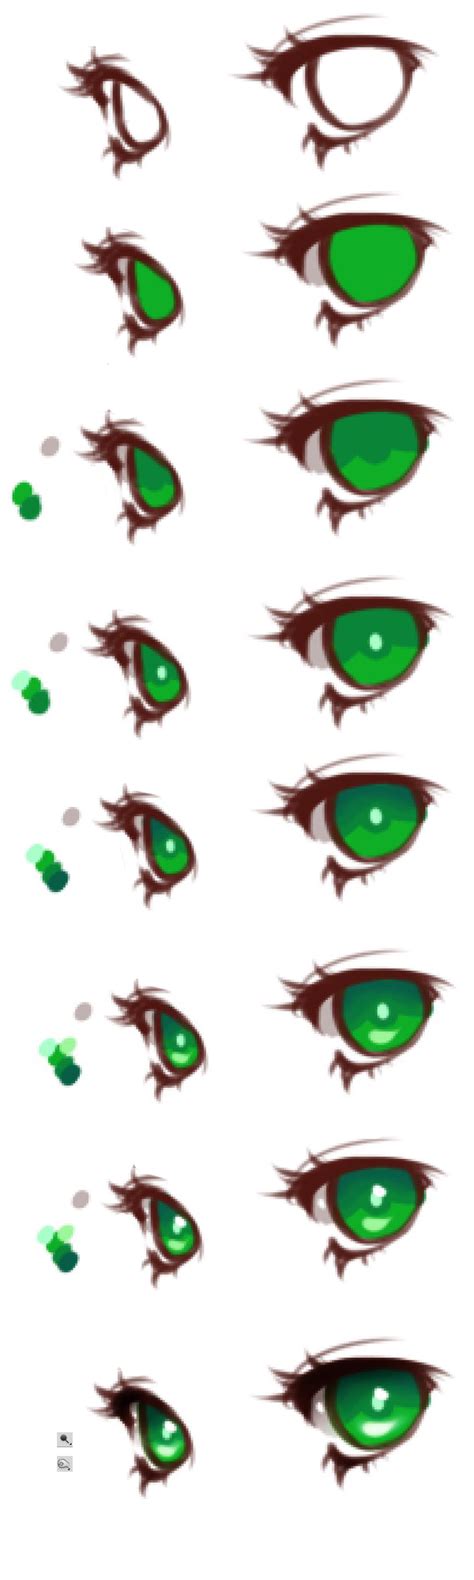 How to draw anime eyes color. Anime Eyes Coloring Tutorial by HaloBlaBla on DeviantArt